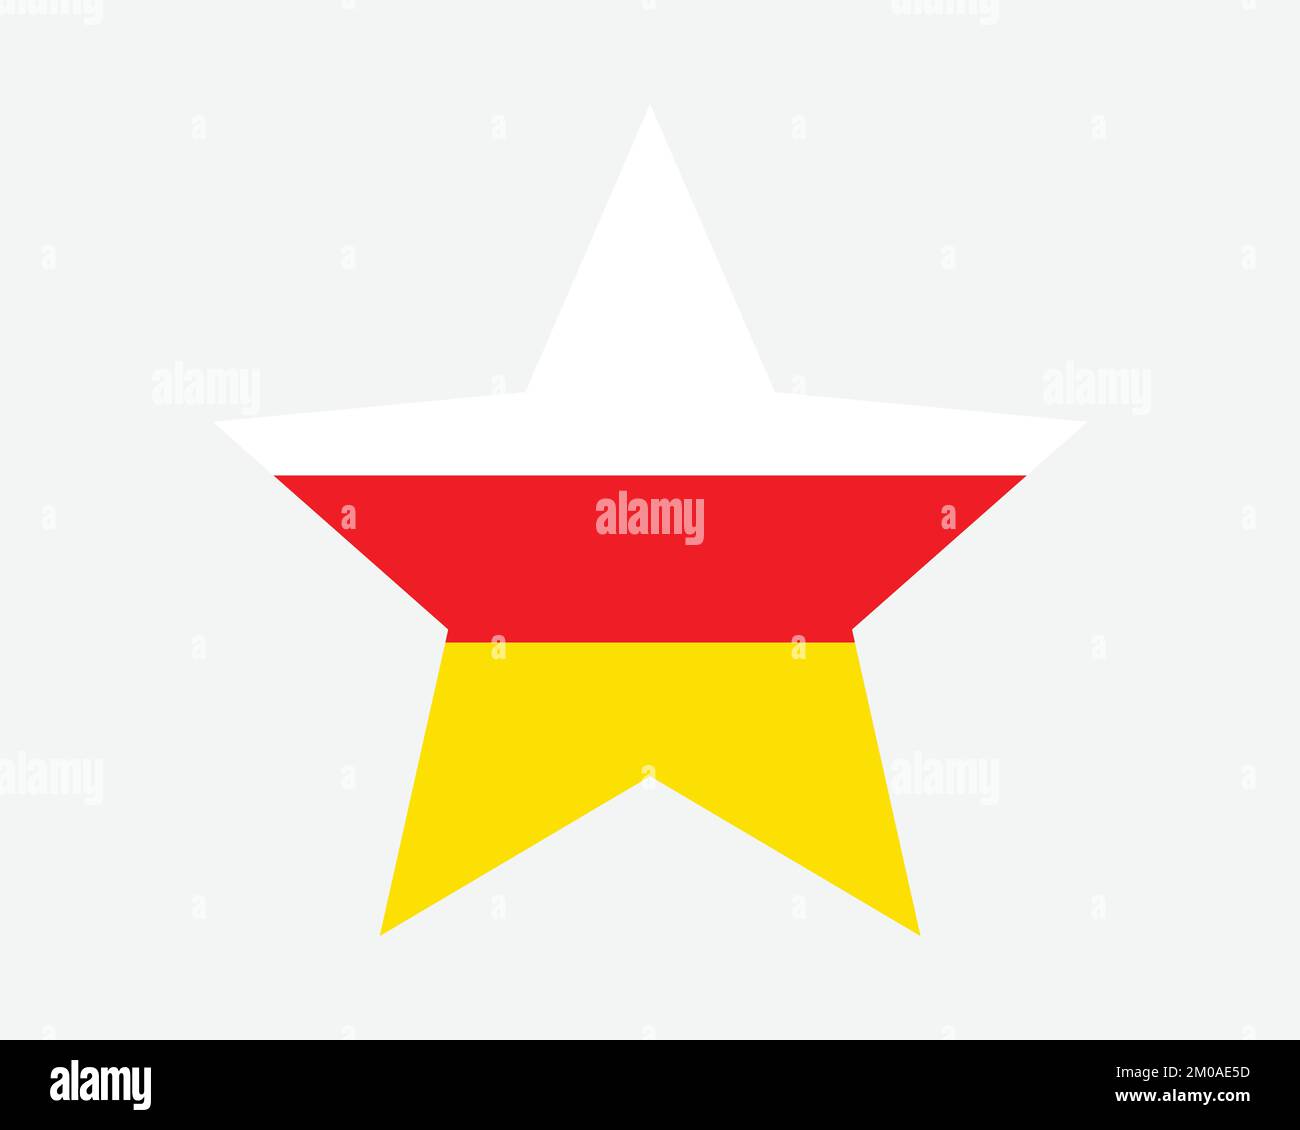 South Ossetia Star Flag. South Ossetian Star Shape Flag. Country National Banner Icon Symbol Vector Flat Artwork Graphic Illustration Stock Vector